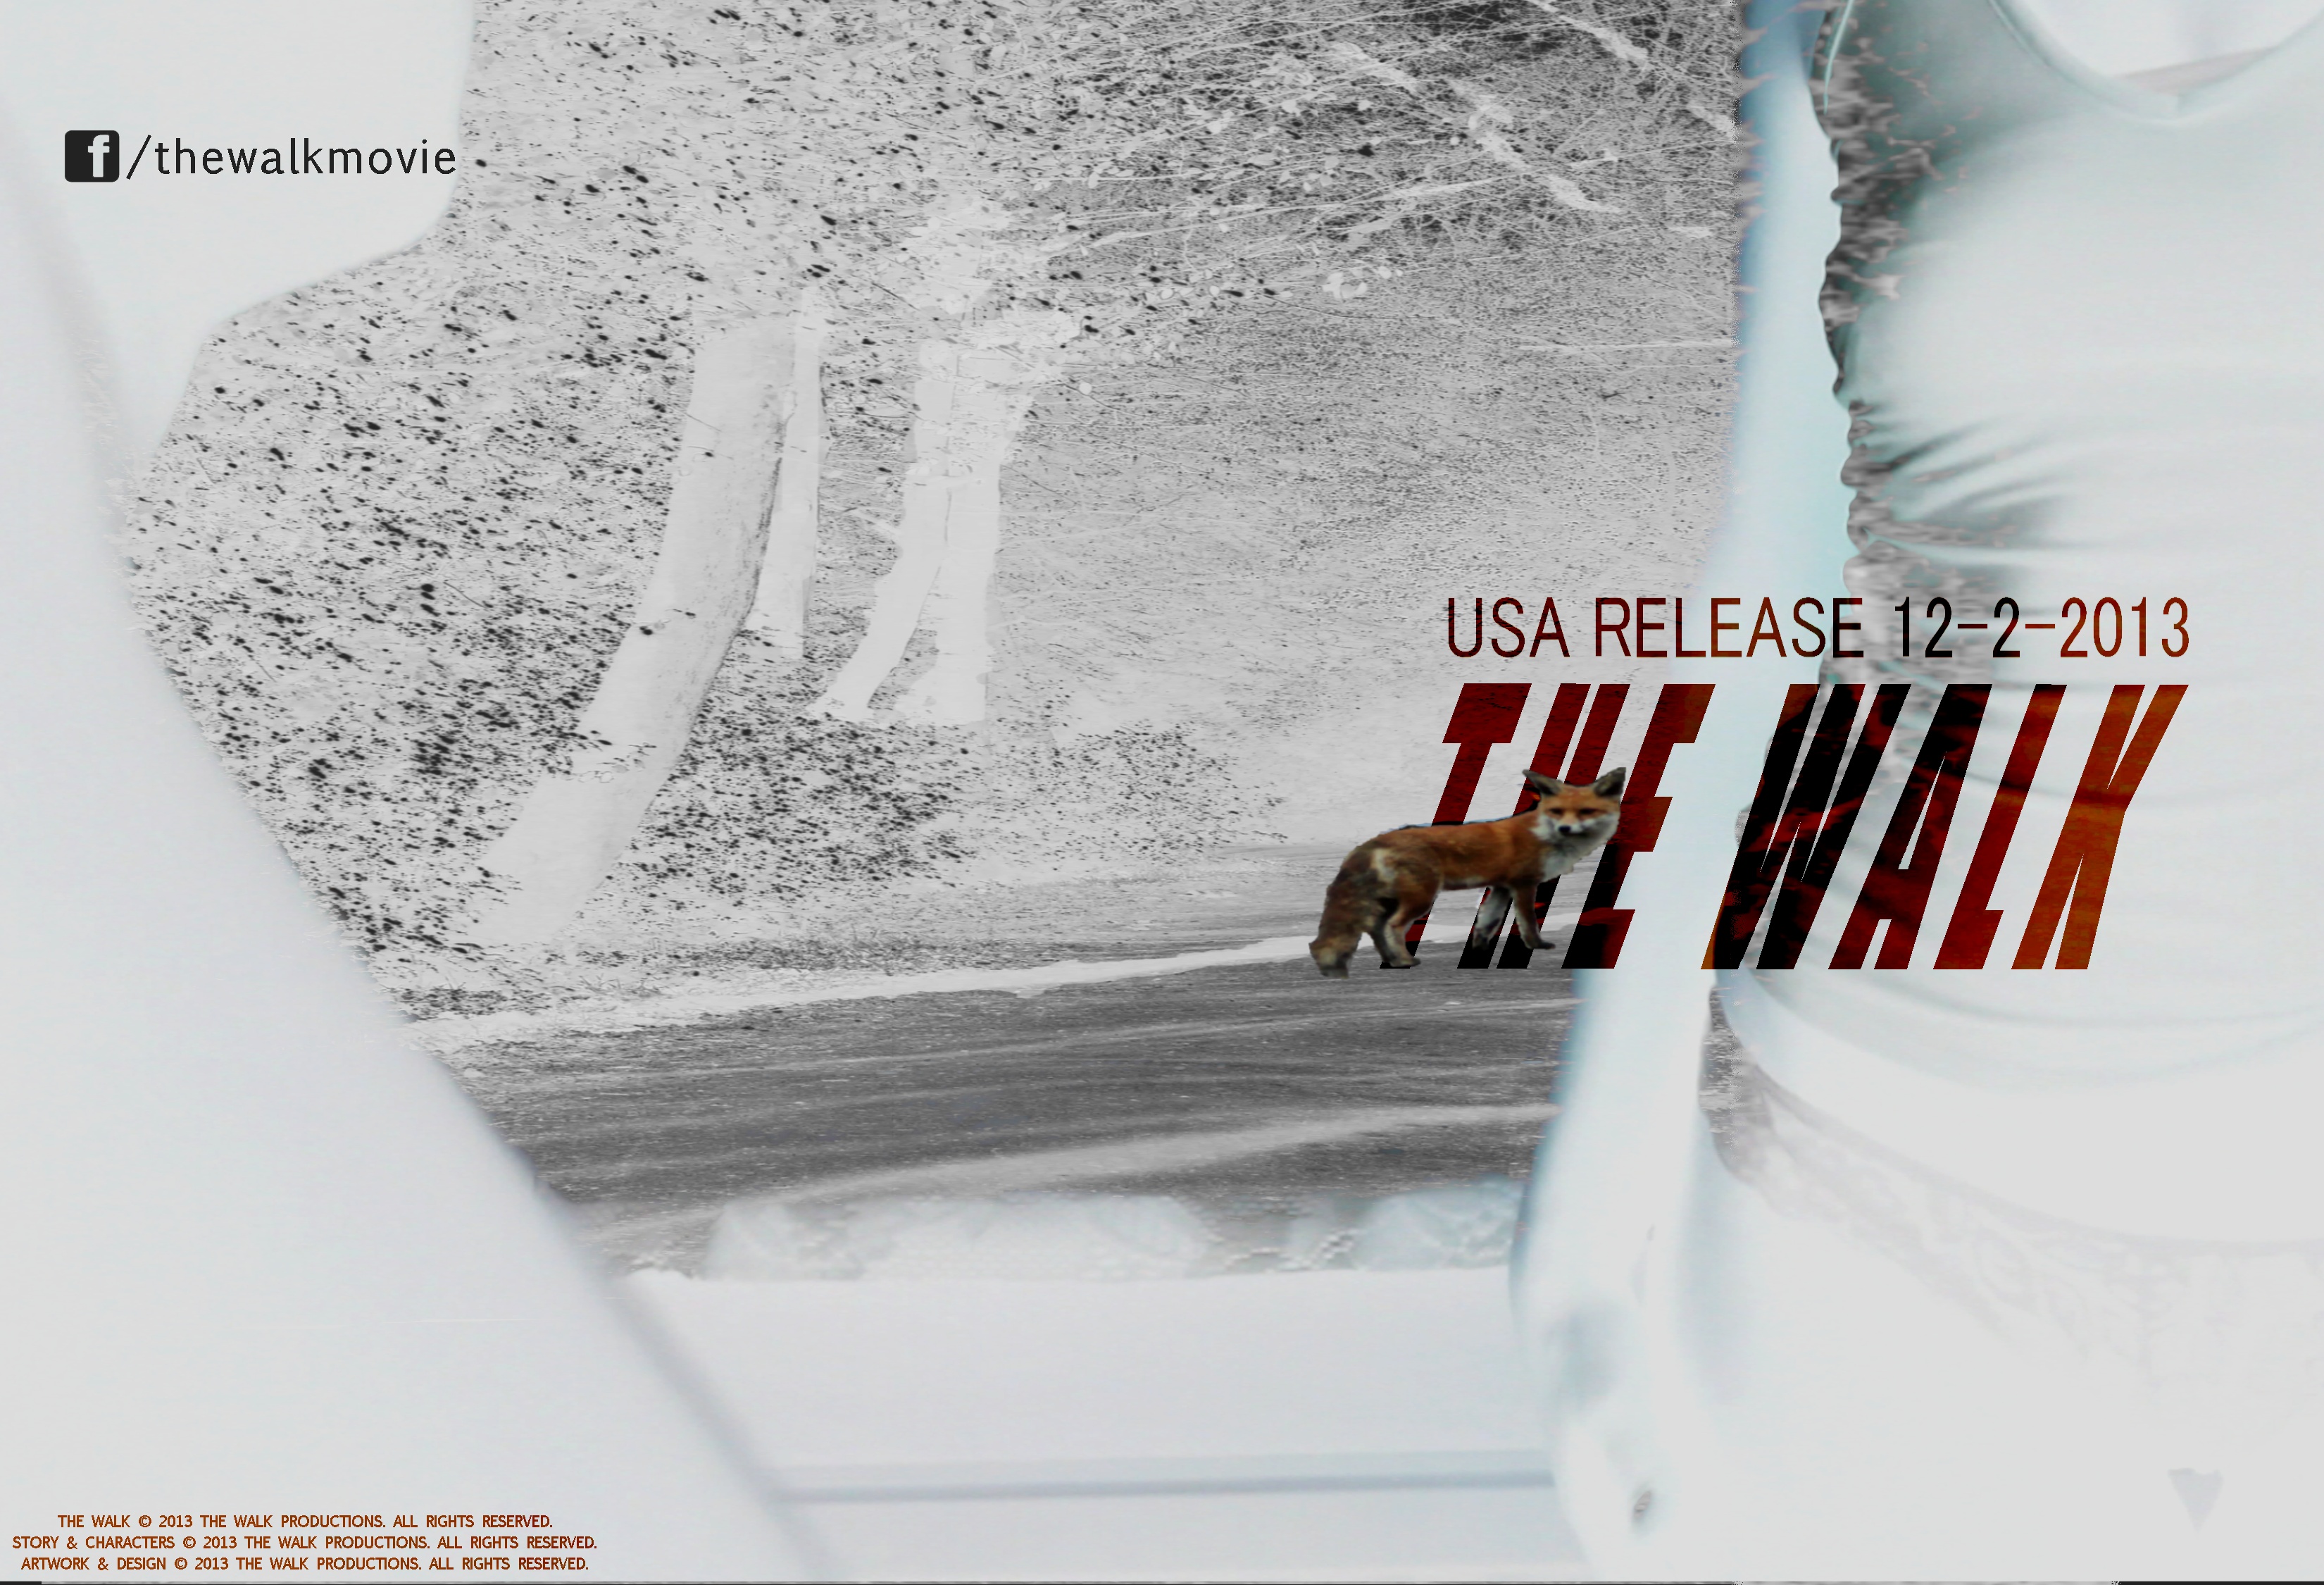 USA RELEASE DATE POSTER